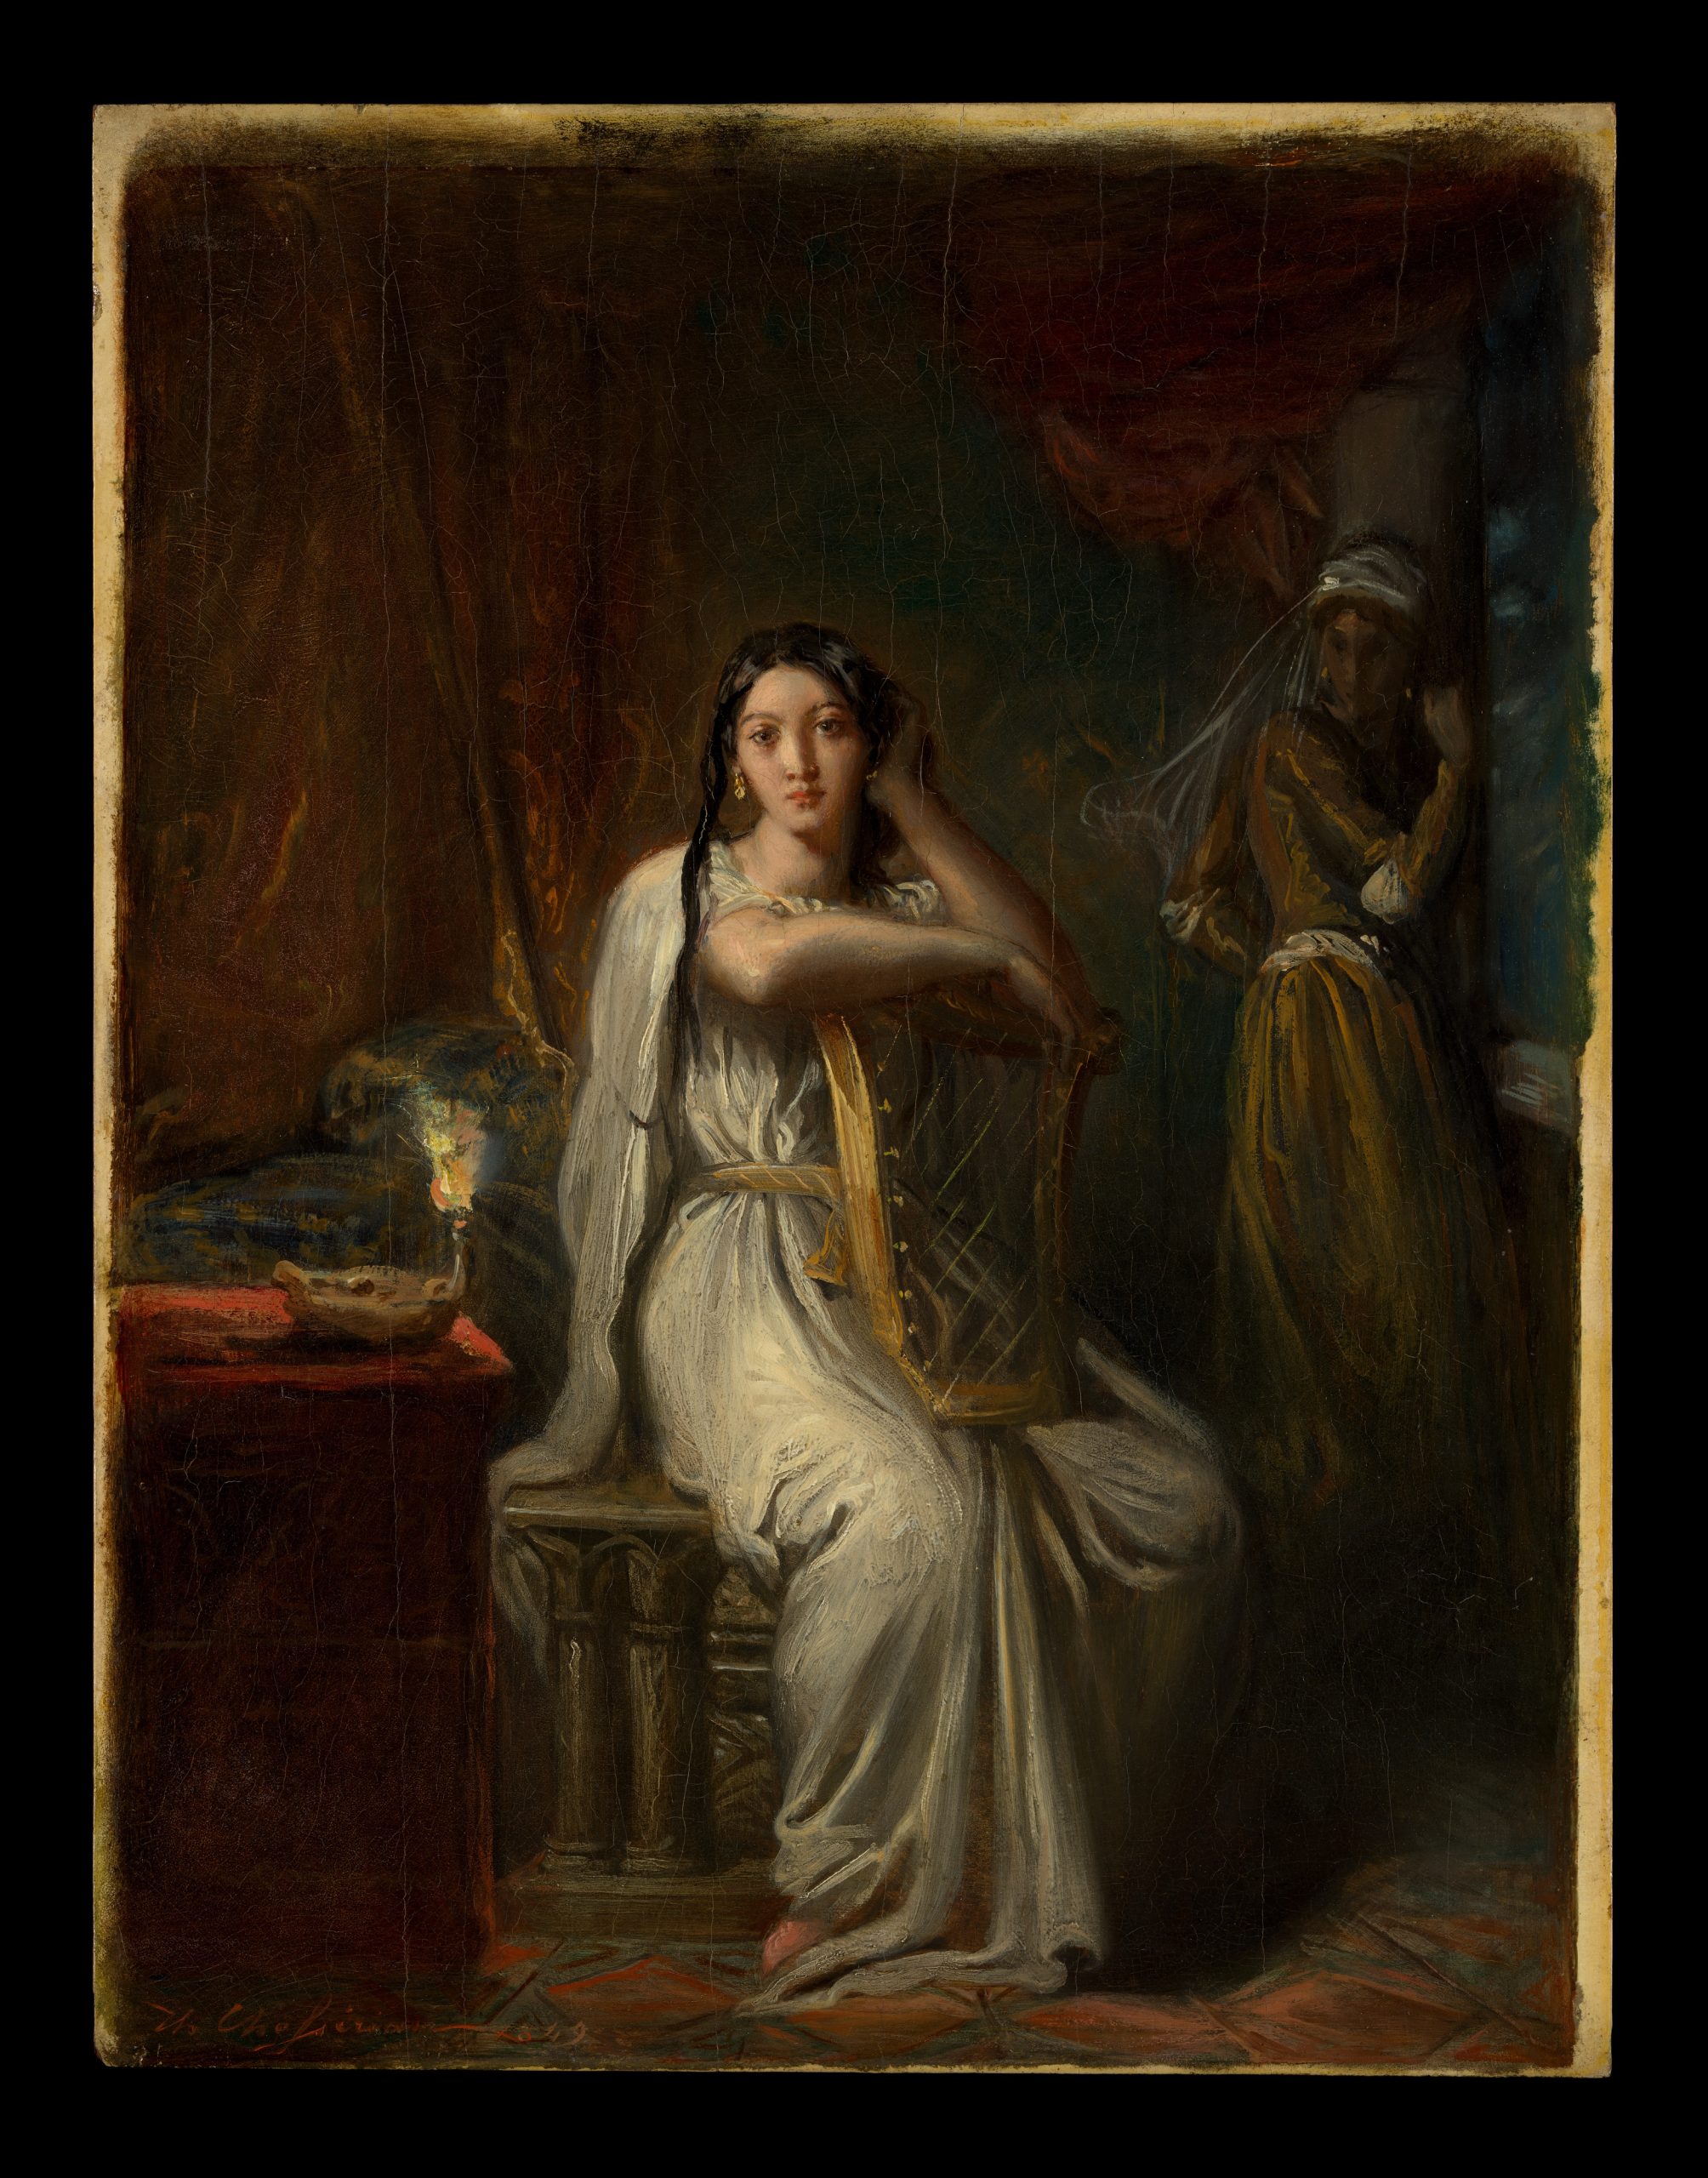 A portrait of a woman sitting down while a figure stands behind her.